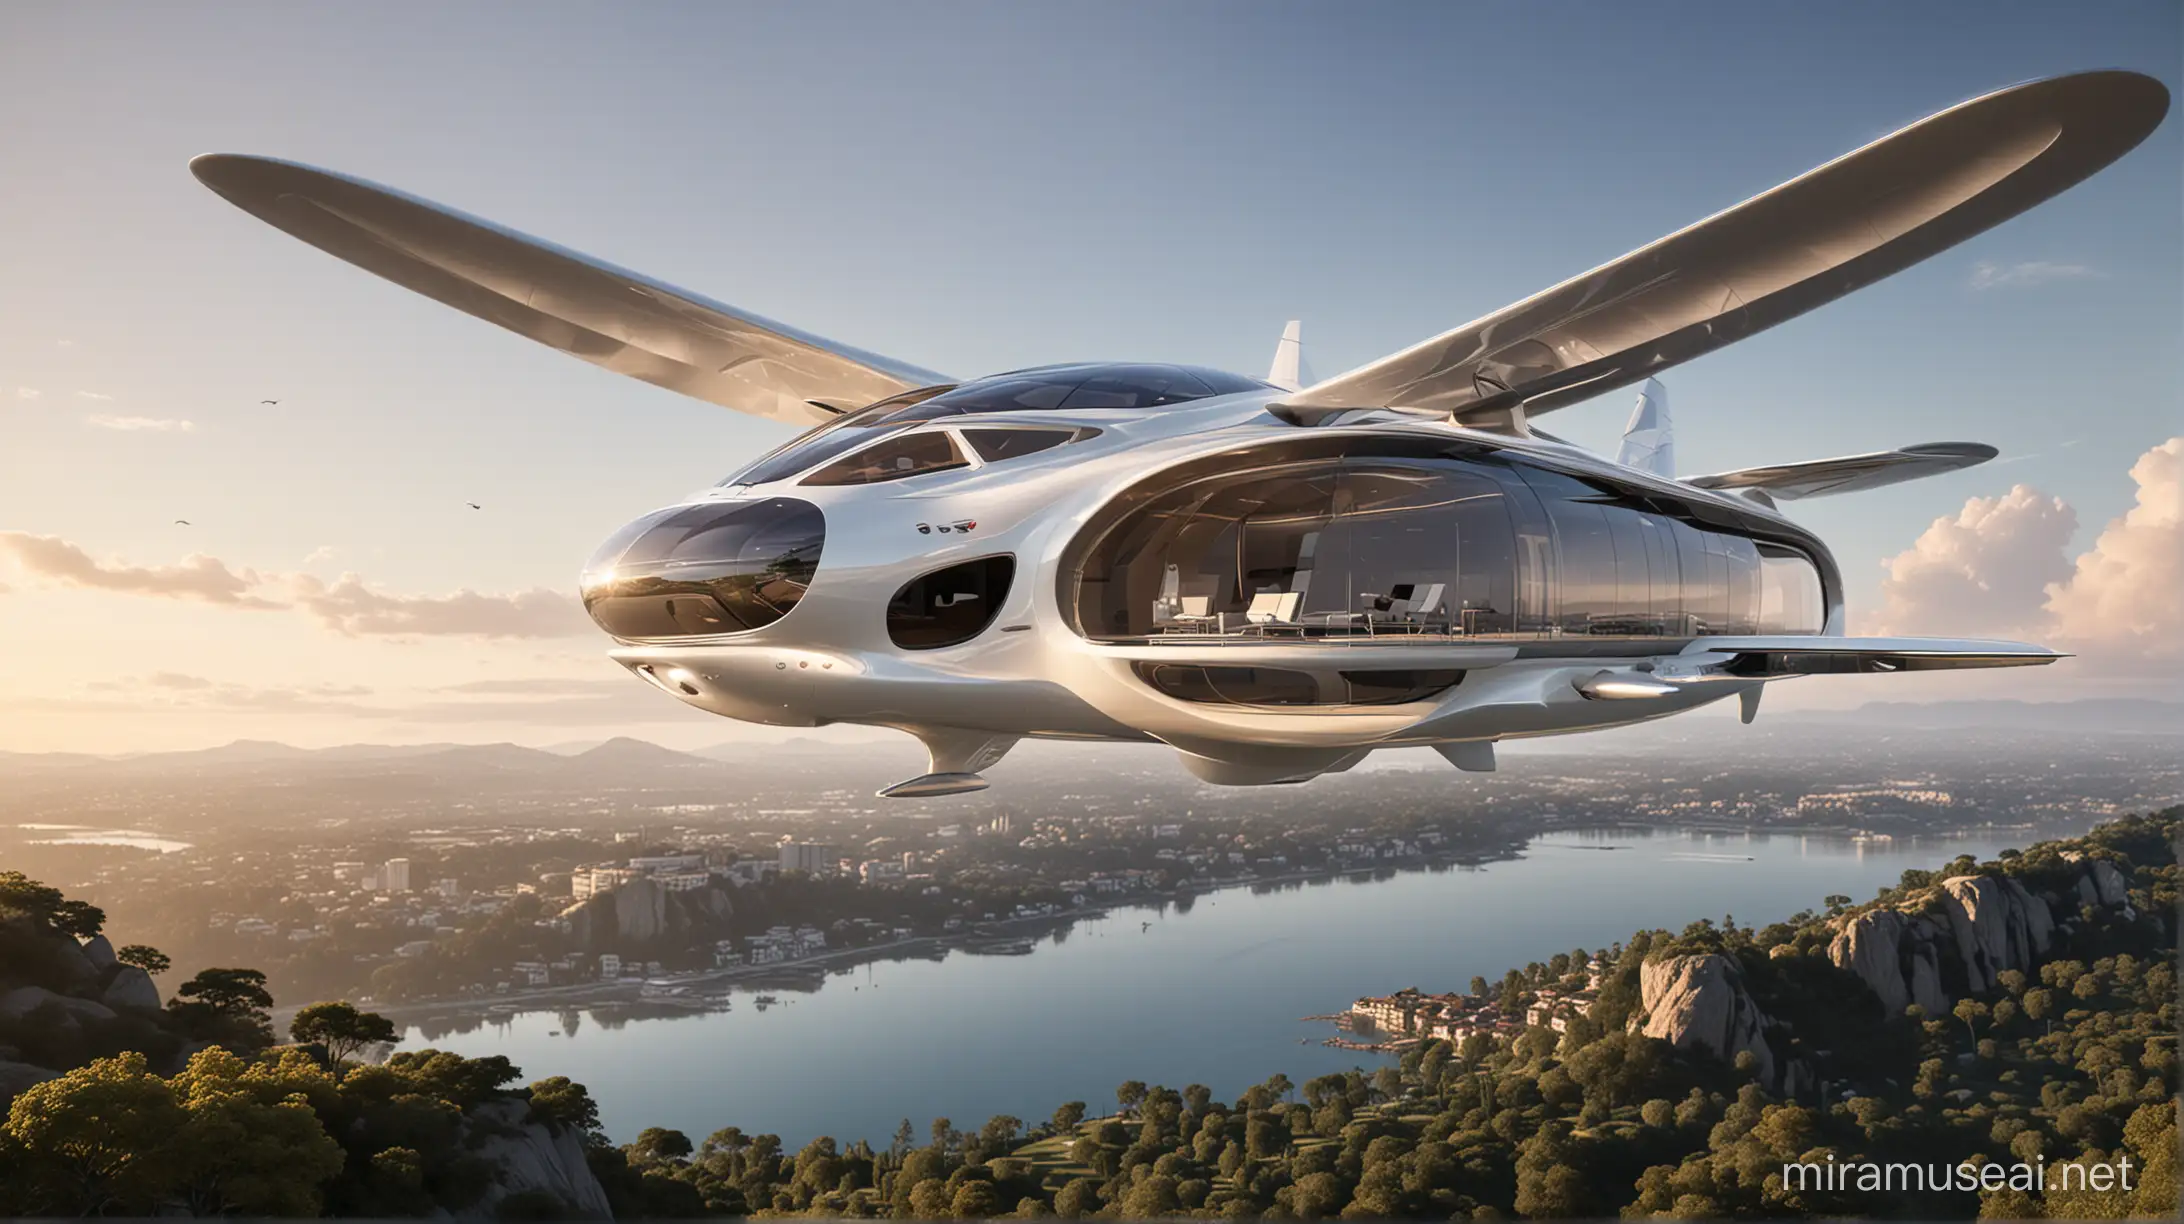 "Employ Miramuse AI to design an exquisite three-story flying home, incorporating lightweight materials and advanced aerodynamic principles for optimal performance. Envision sleek and elegant architecture, efficient propulsion systems, retractable wings for stability and maneuverability, luxurious interiors with panoramic views, state-of-the-art navigation and communication technology, advanced safety features, and sustainable energy solutions, crafting a stunning airborne residence that seamlessly blends comfort, style, and innovation in the skies." different from previous 